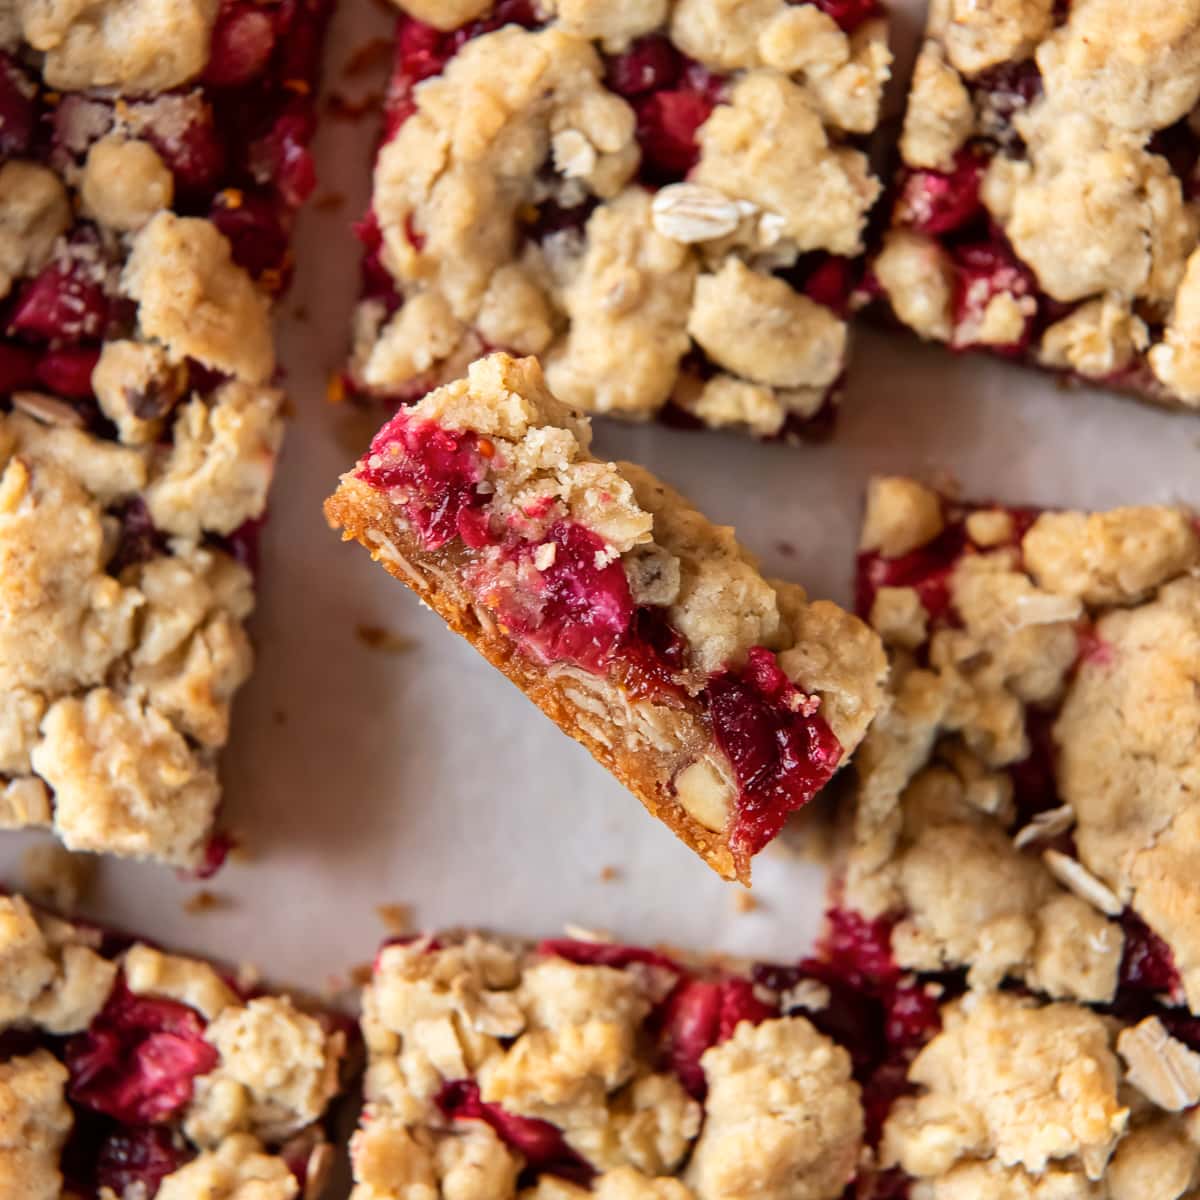 cranberry crumble bar on its side showing layers next to more bars.